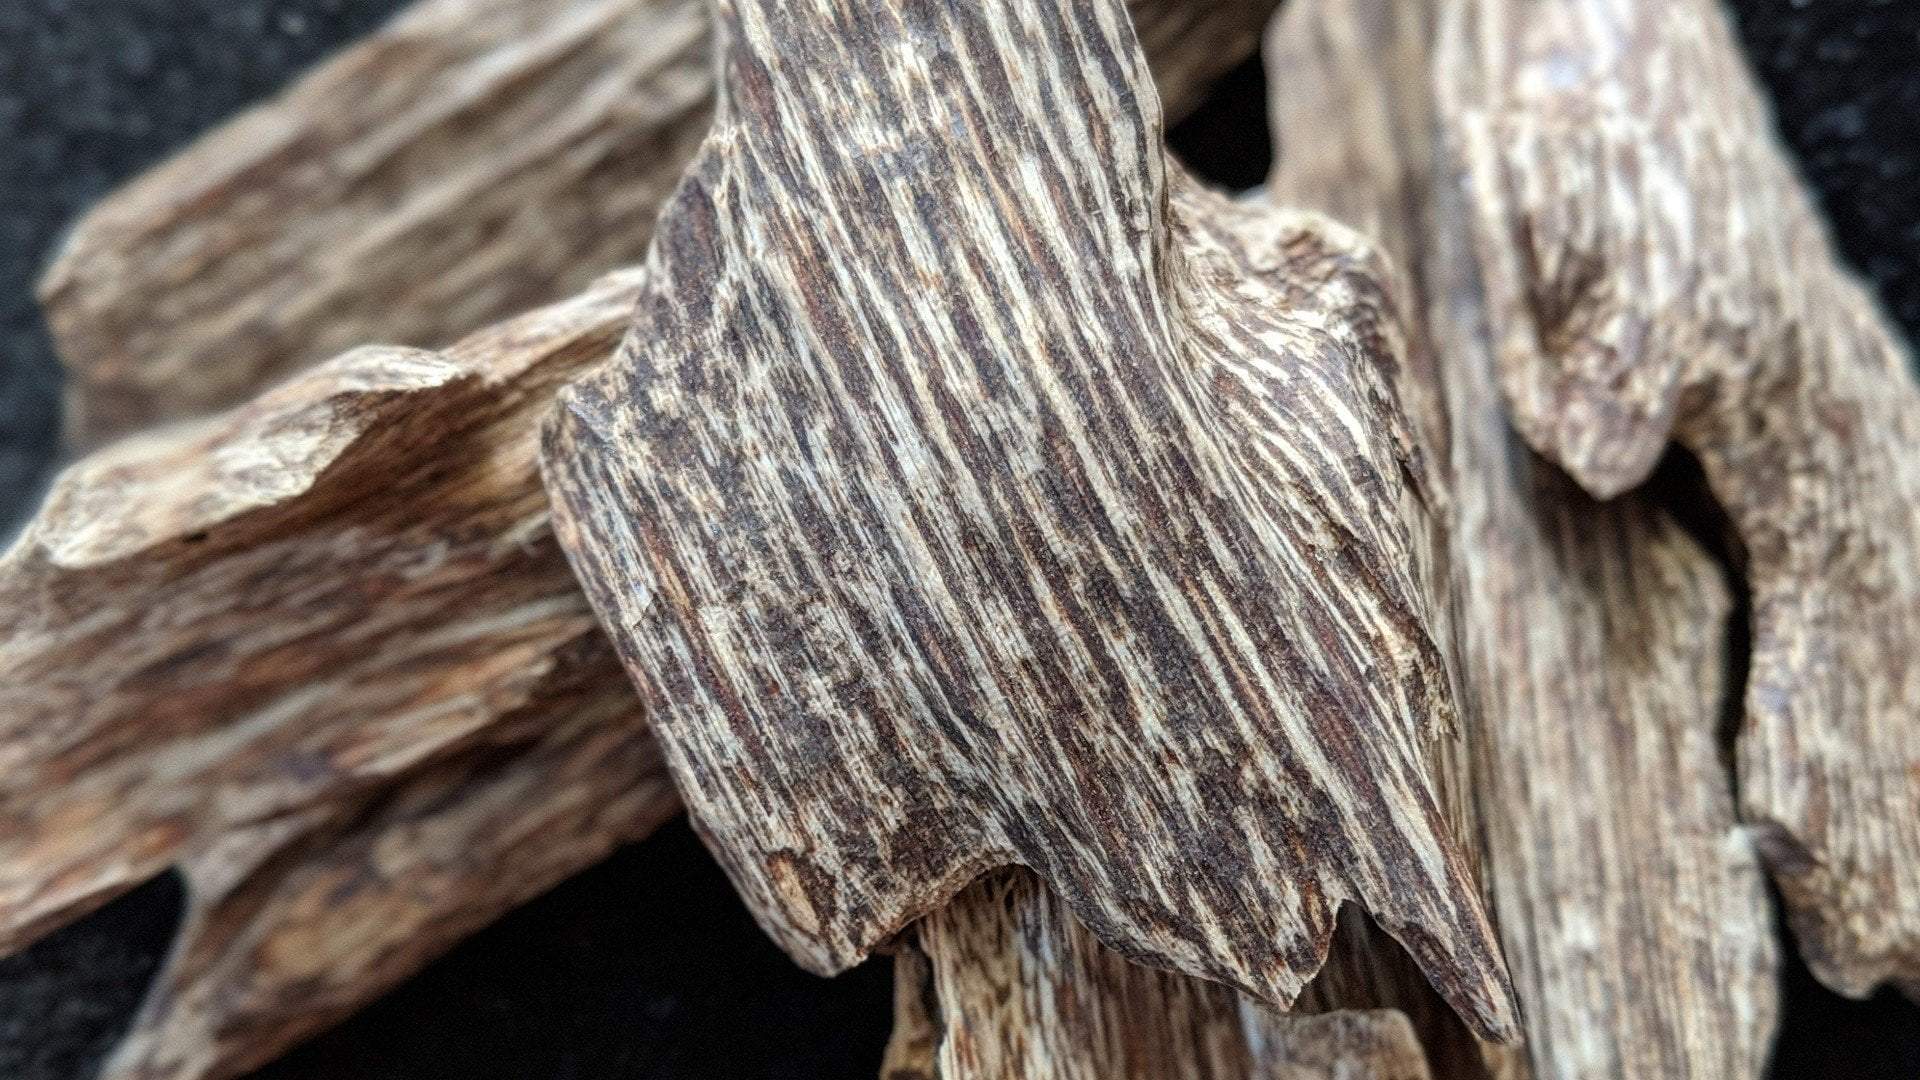 *LIMITED STOCK * Wild Vietnamese Agarwood Oud Oil Binh Phuoc Forest The Honey Dried Herbs -